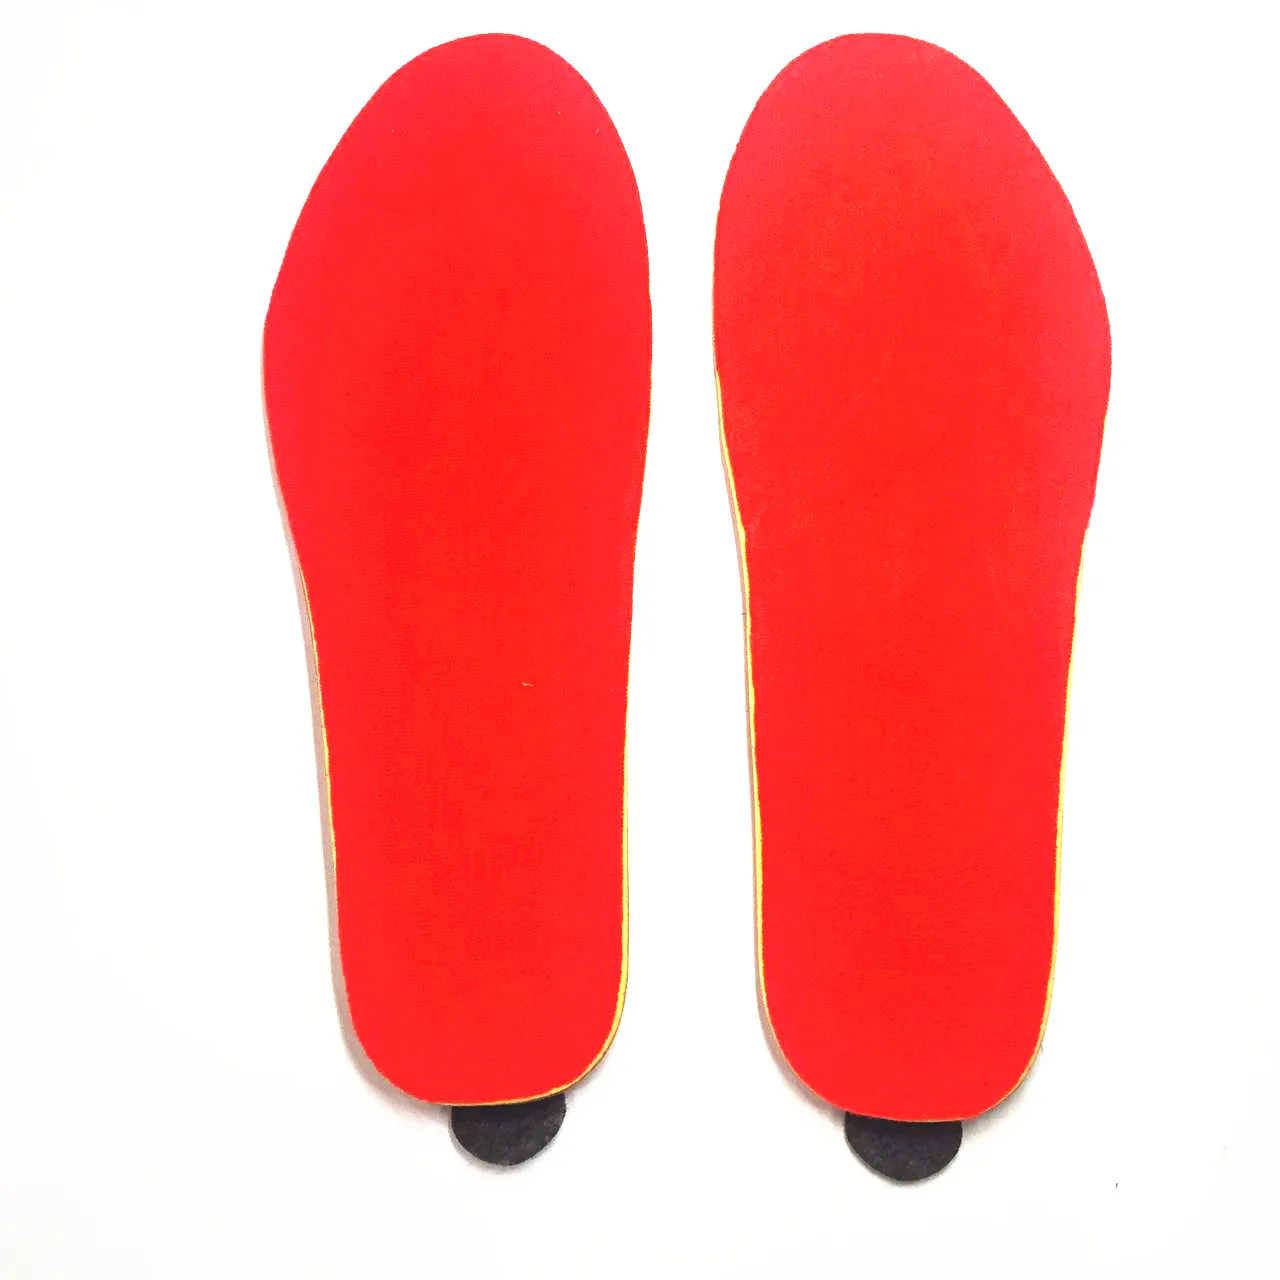 

Foot Warmers Heated Insoles Heavy Duty 3.7V 1900mA Built in Lithium Polymer Rechargeable Battery Shoe Insoles